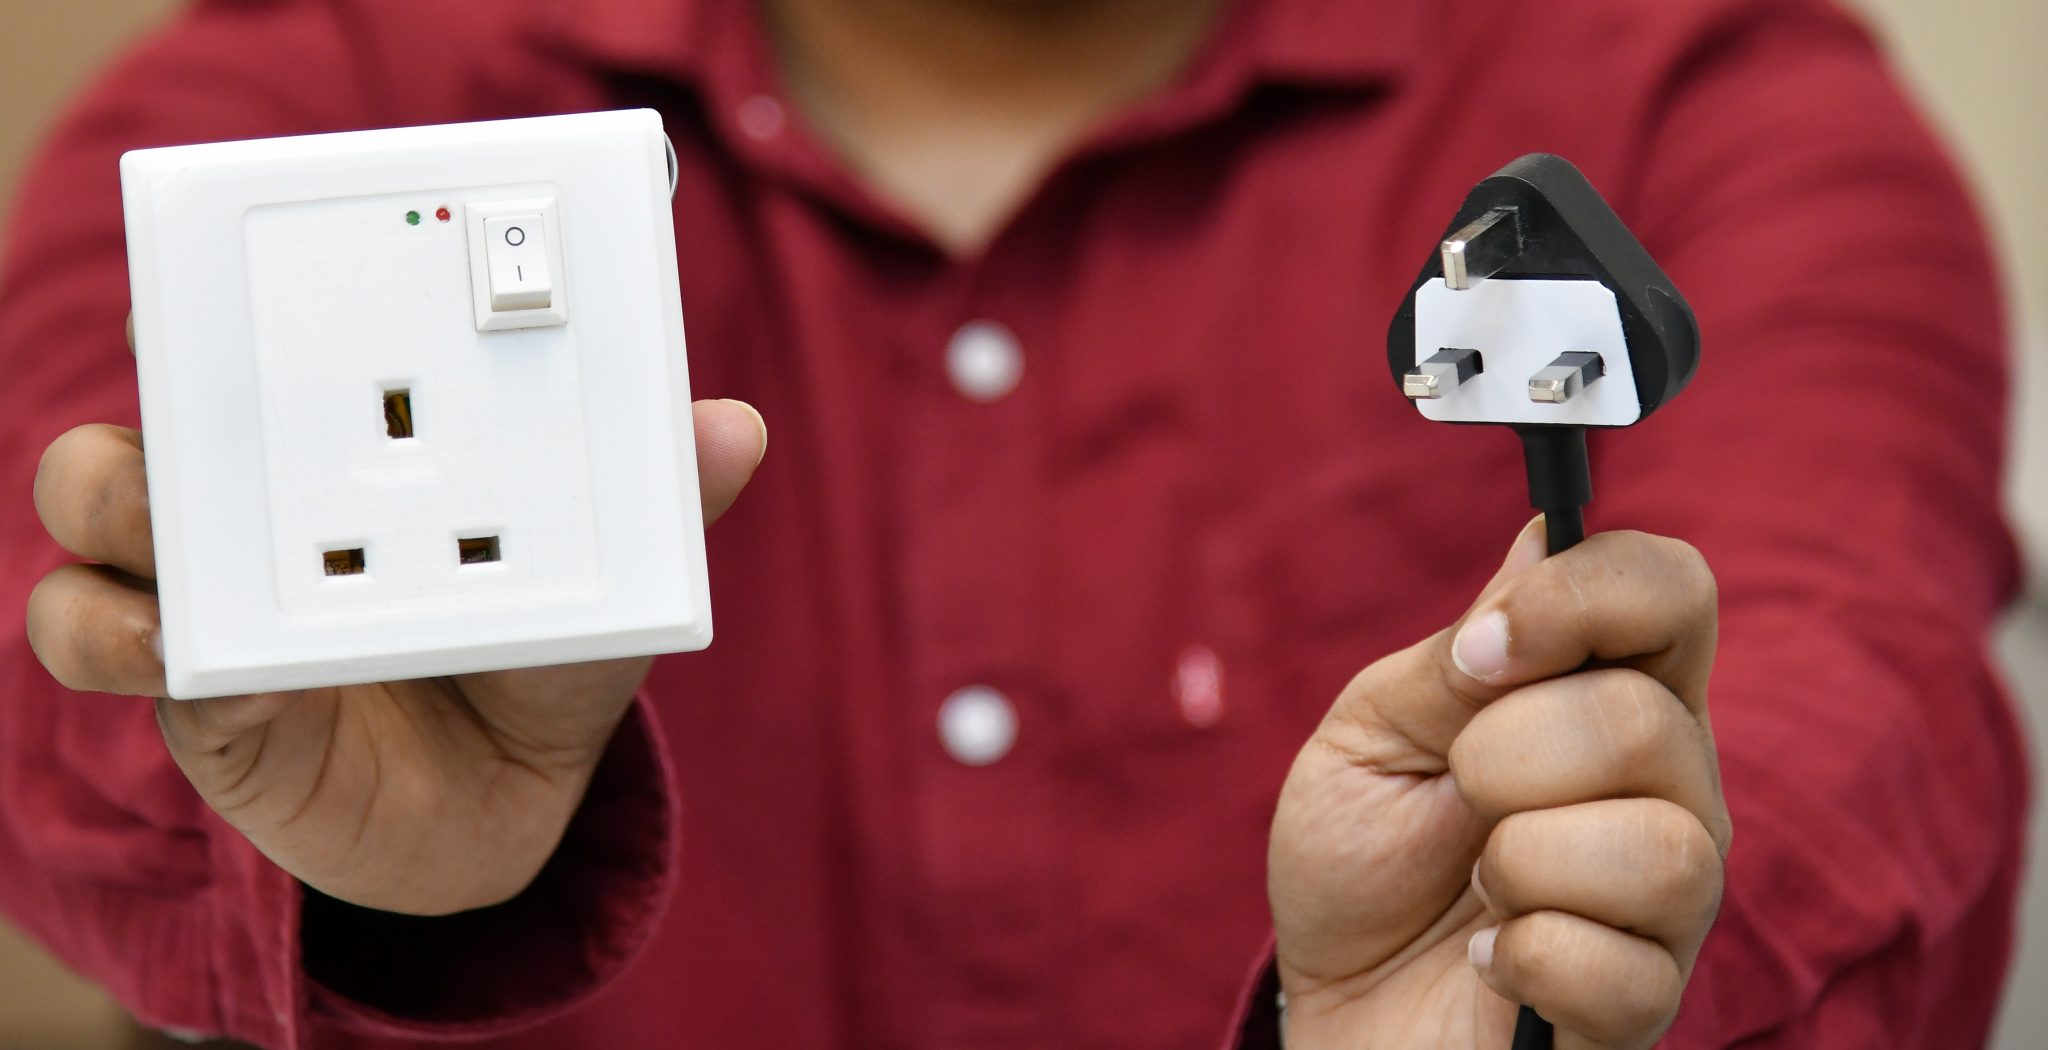 The team behind the SEOS system say their smart sockets could form the foundation for an ‘Internet of Electricals’